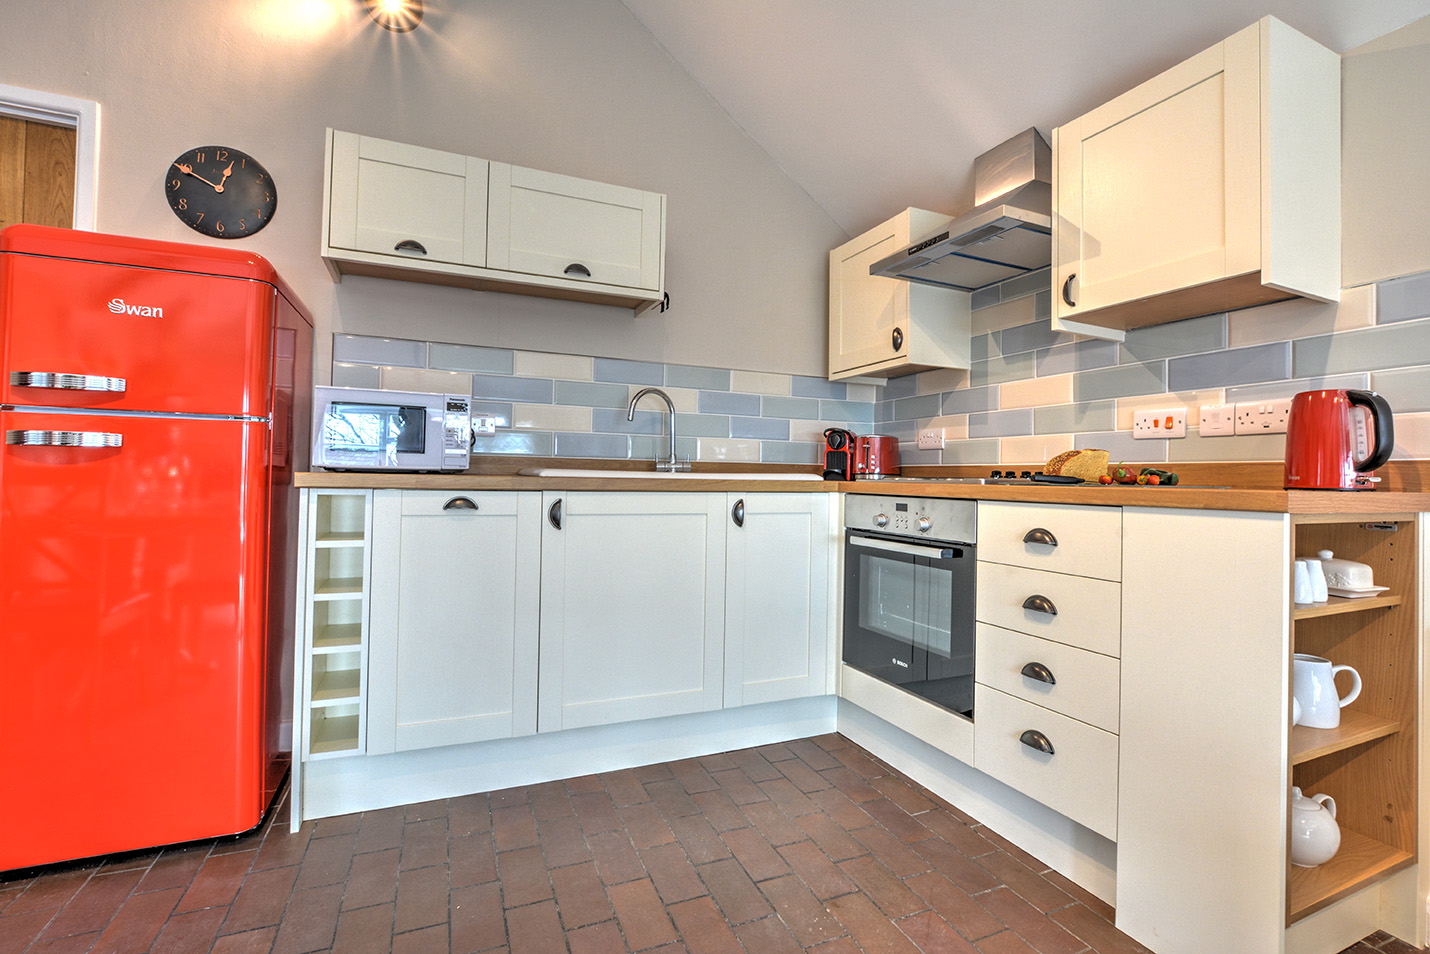 The kitchen of Goosehill luxury self catering converted barn holiday cottage at Penrose Burden in North Cornwall 01.jpg